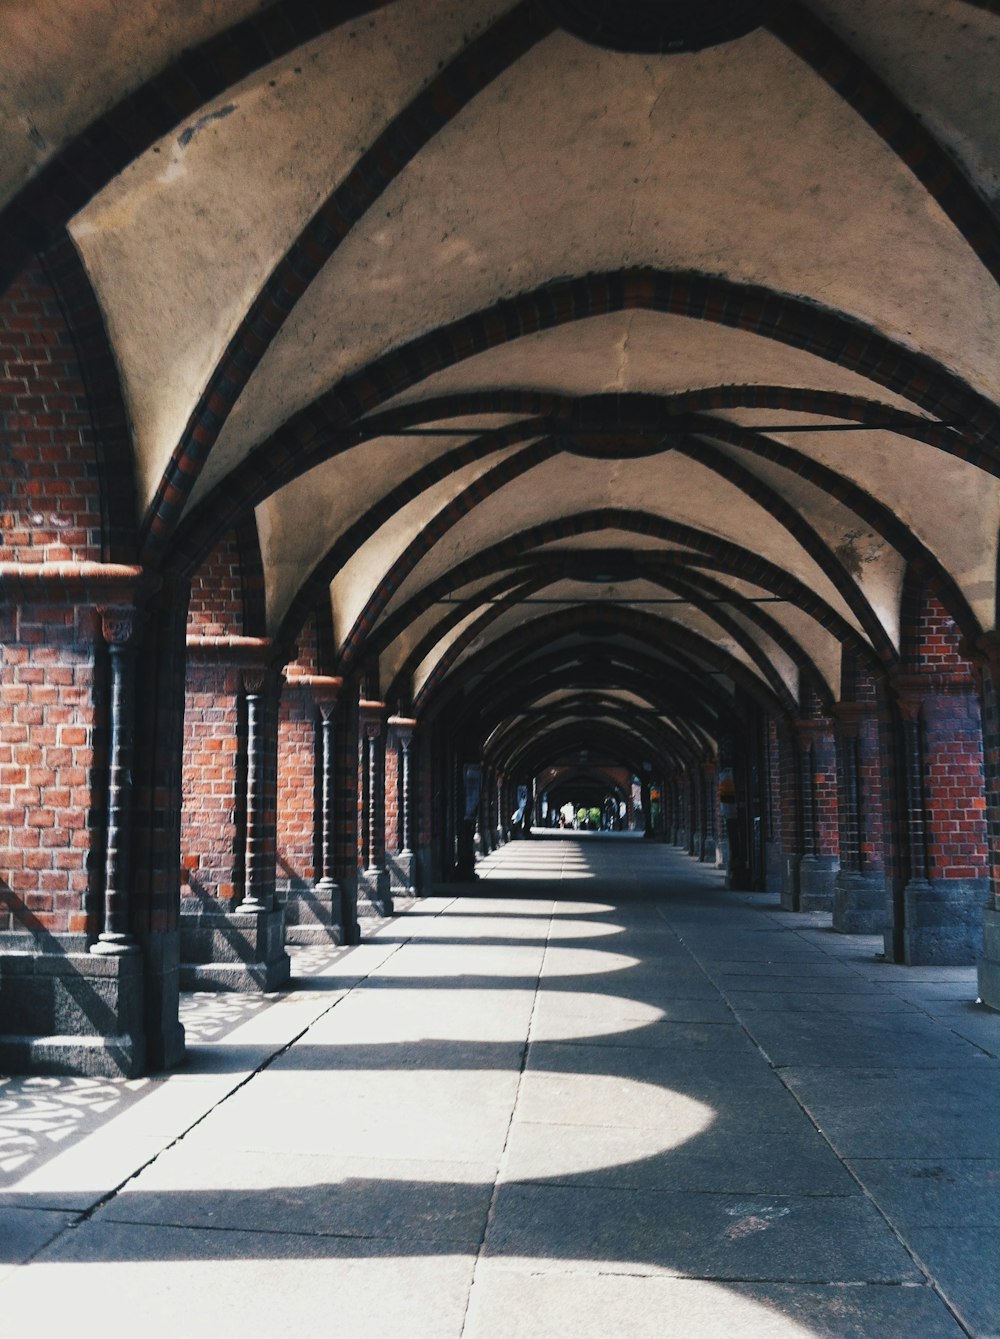 a walkway lined with arches and benches on both sides of it